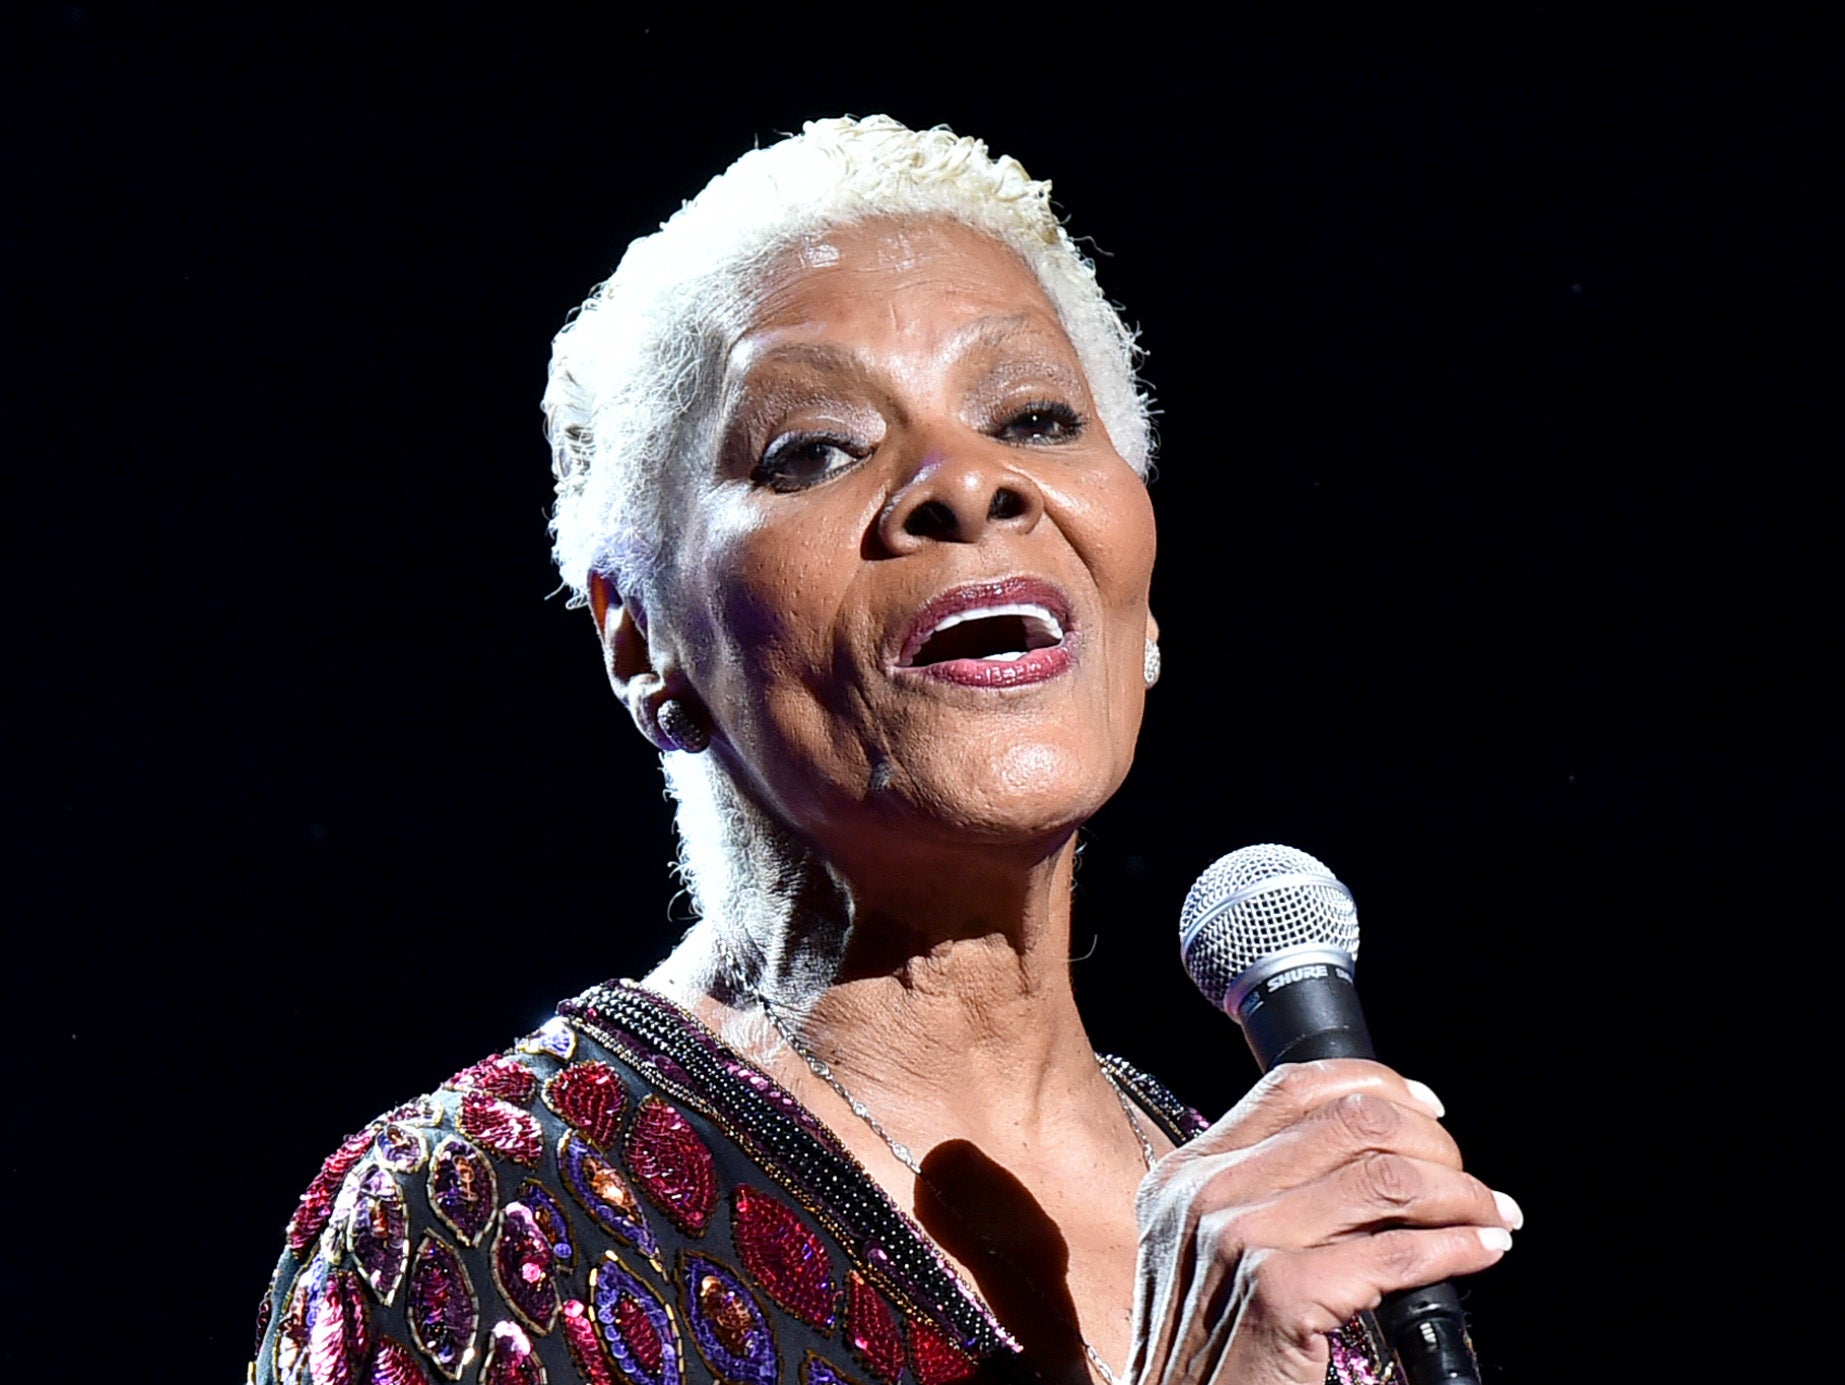 Dionne Warwick once called Snoop Dogg out for his lyrics